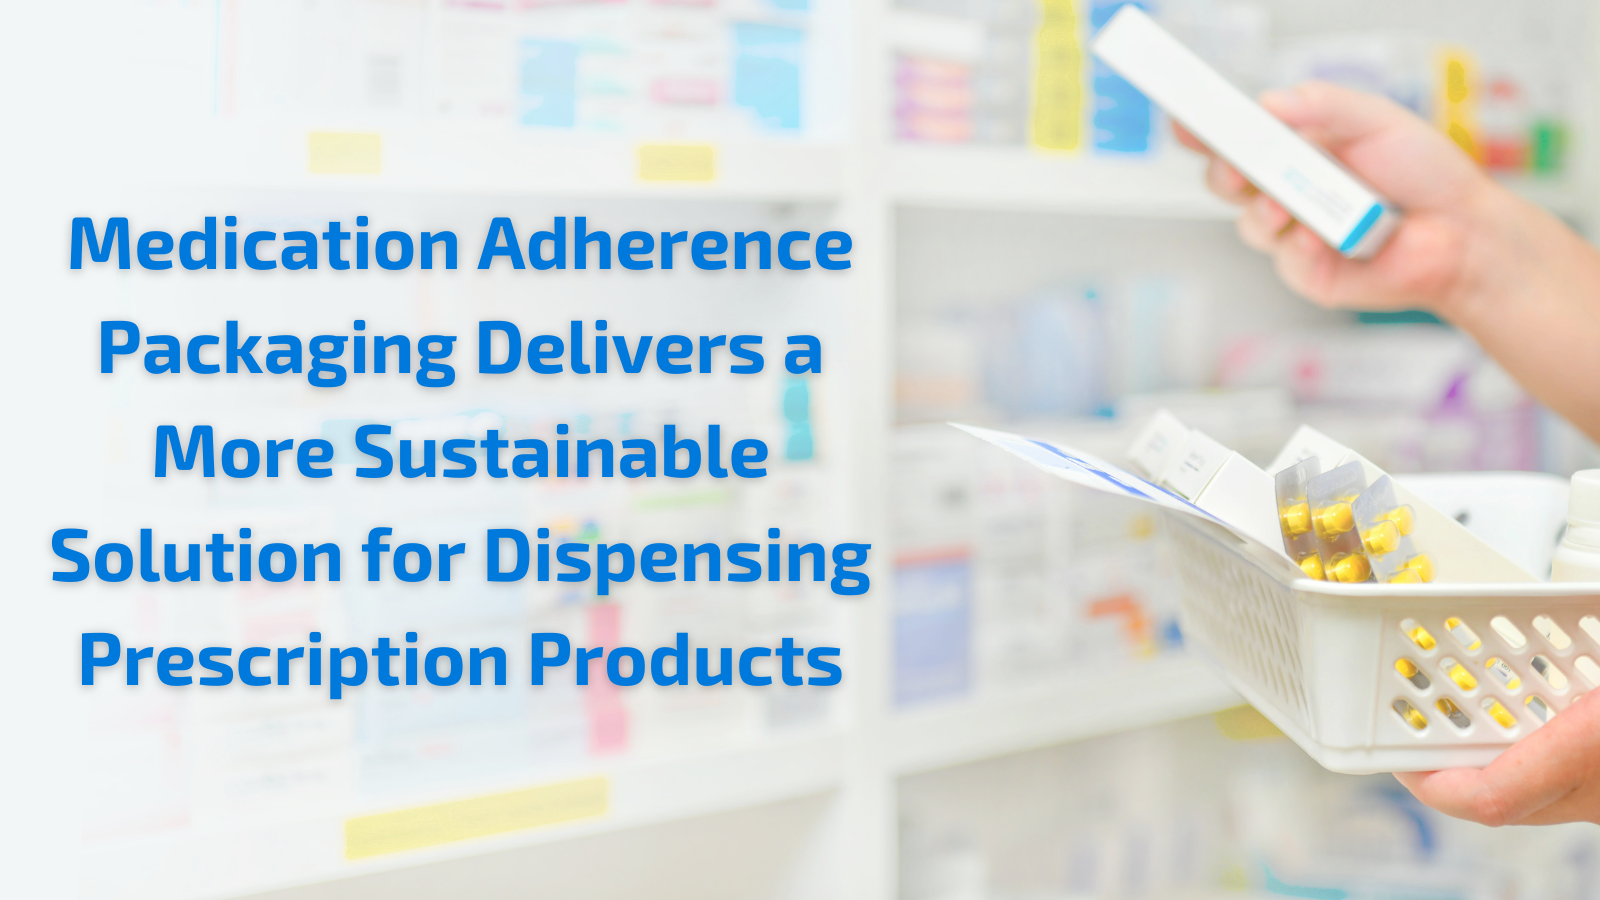 Medication Adherence Packaging Delivers a More Sustainable Solution for Dispensing Prescription Products